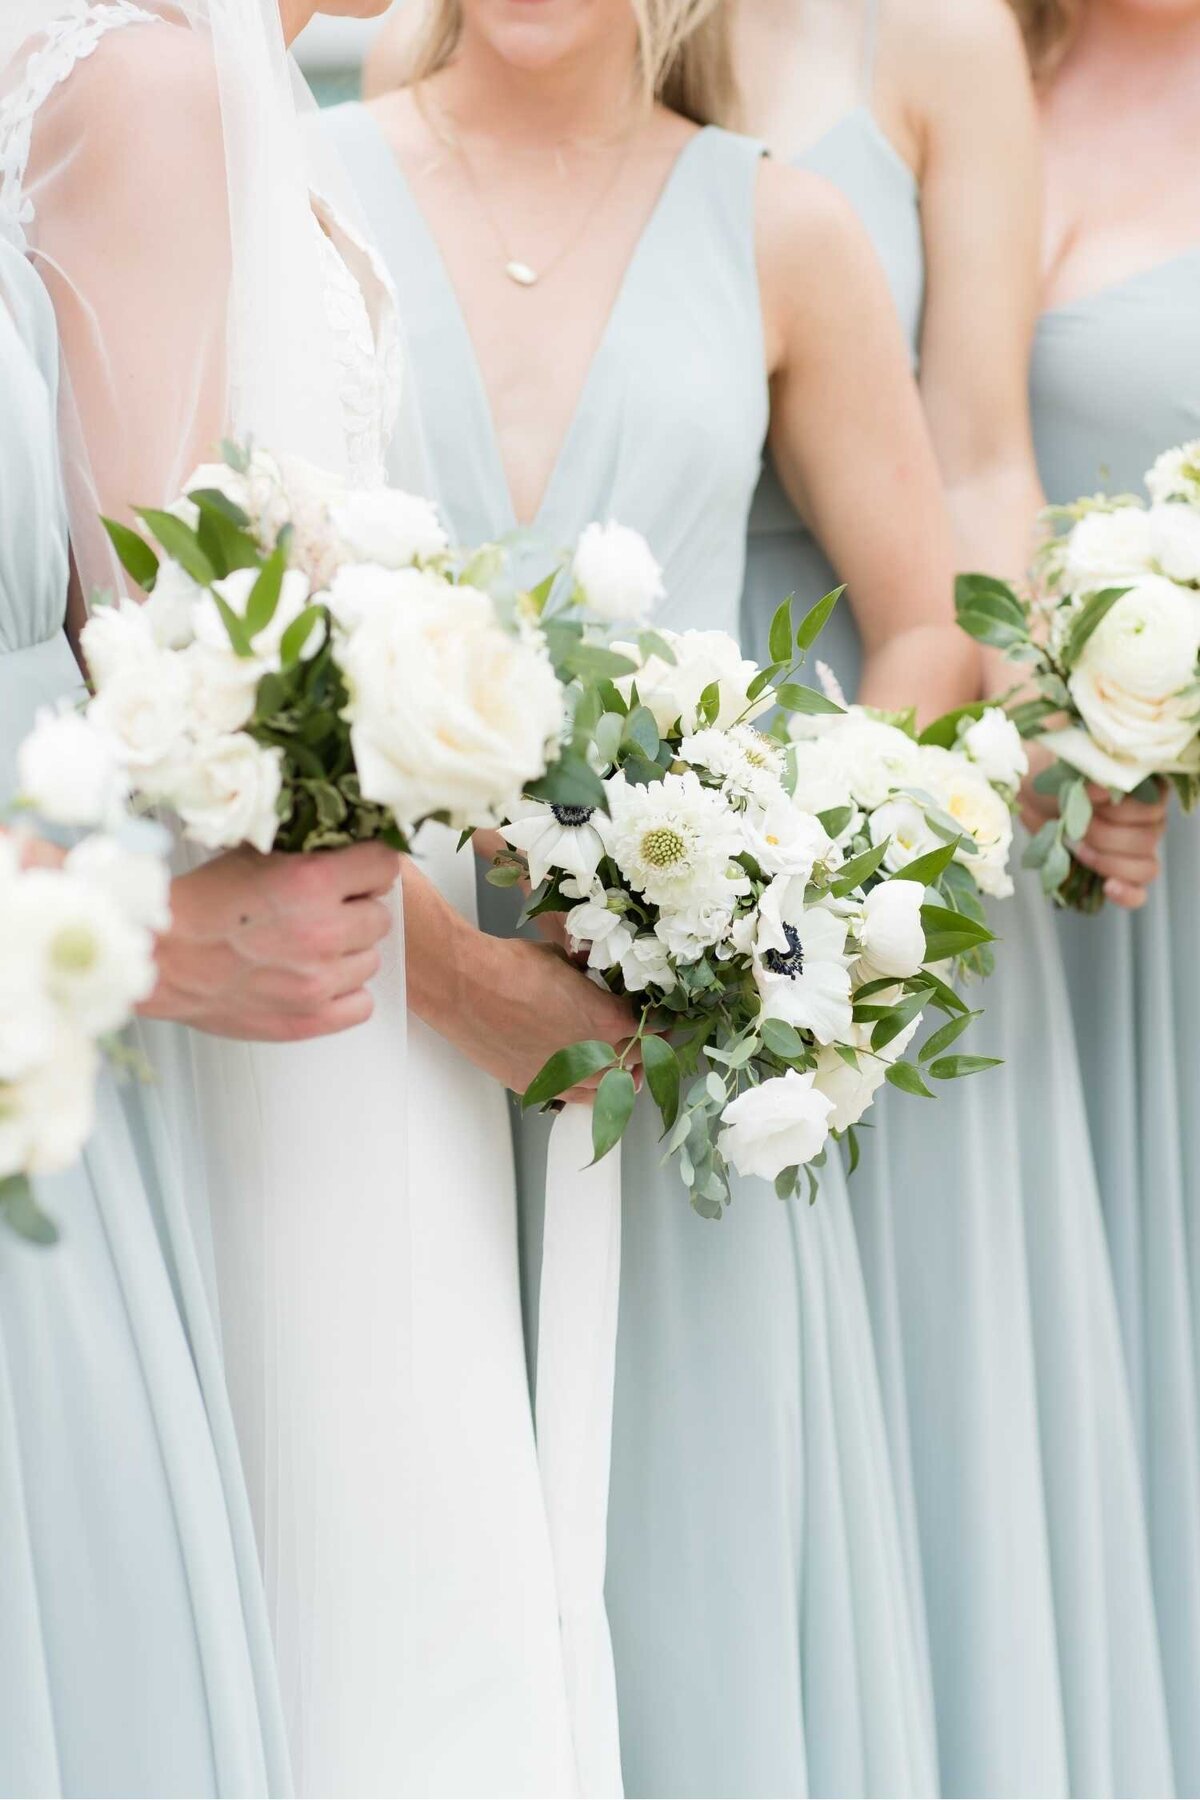 Bride and bridesmaids lush garden bouquets with white and green floral and light blue green dresses at a Luxury Chicago Outdoor Historic Wedding Venue.